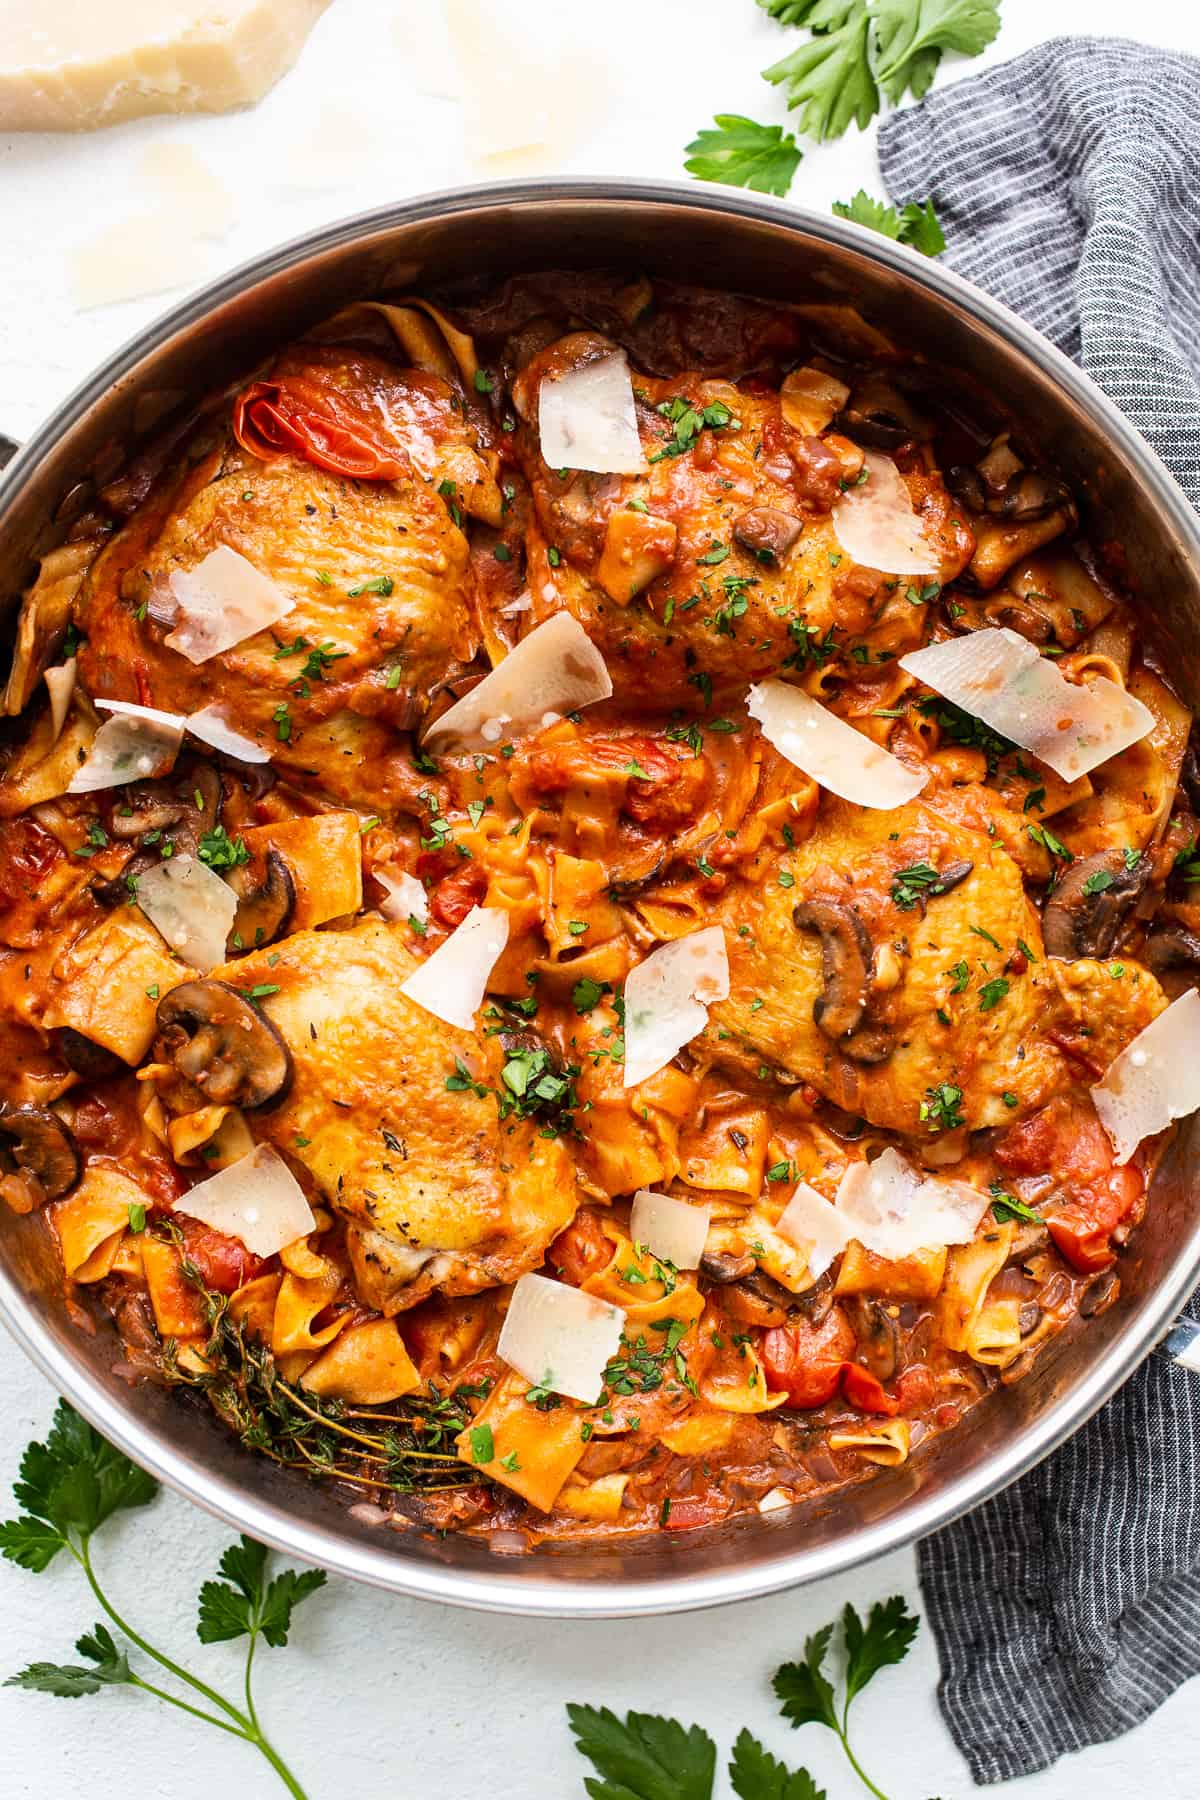 Pappardelle pasta with chicken thighs in a ،.